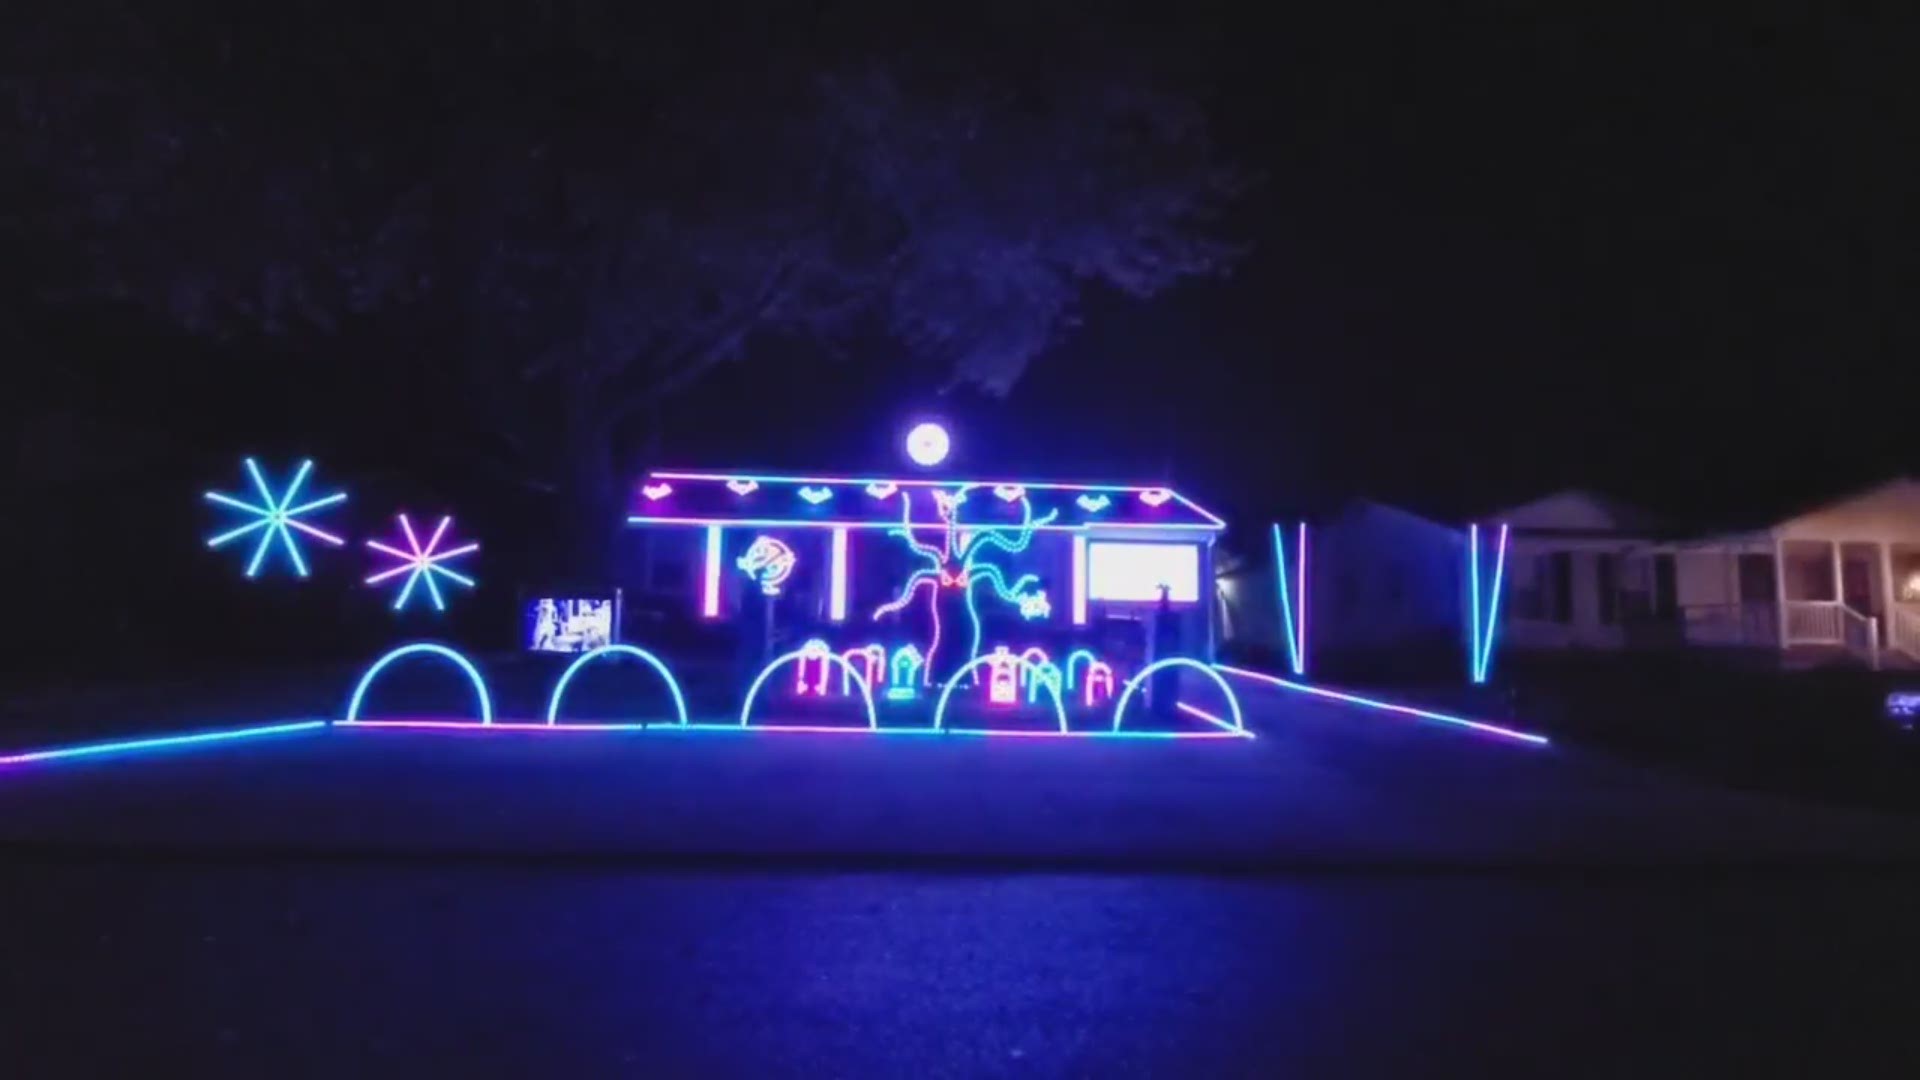 You may remember Blue’s Light Show from previous Christmas seasons,’ now they’re back with a Halloween light show for the entire community to enjoy.